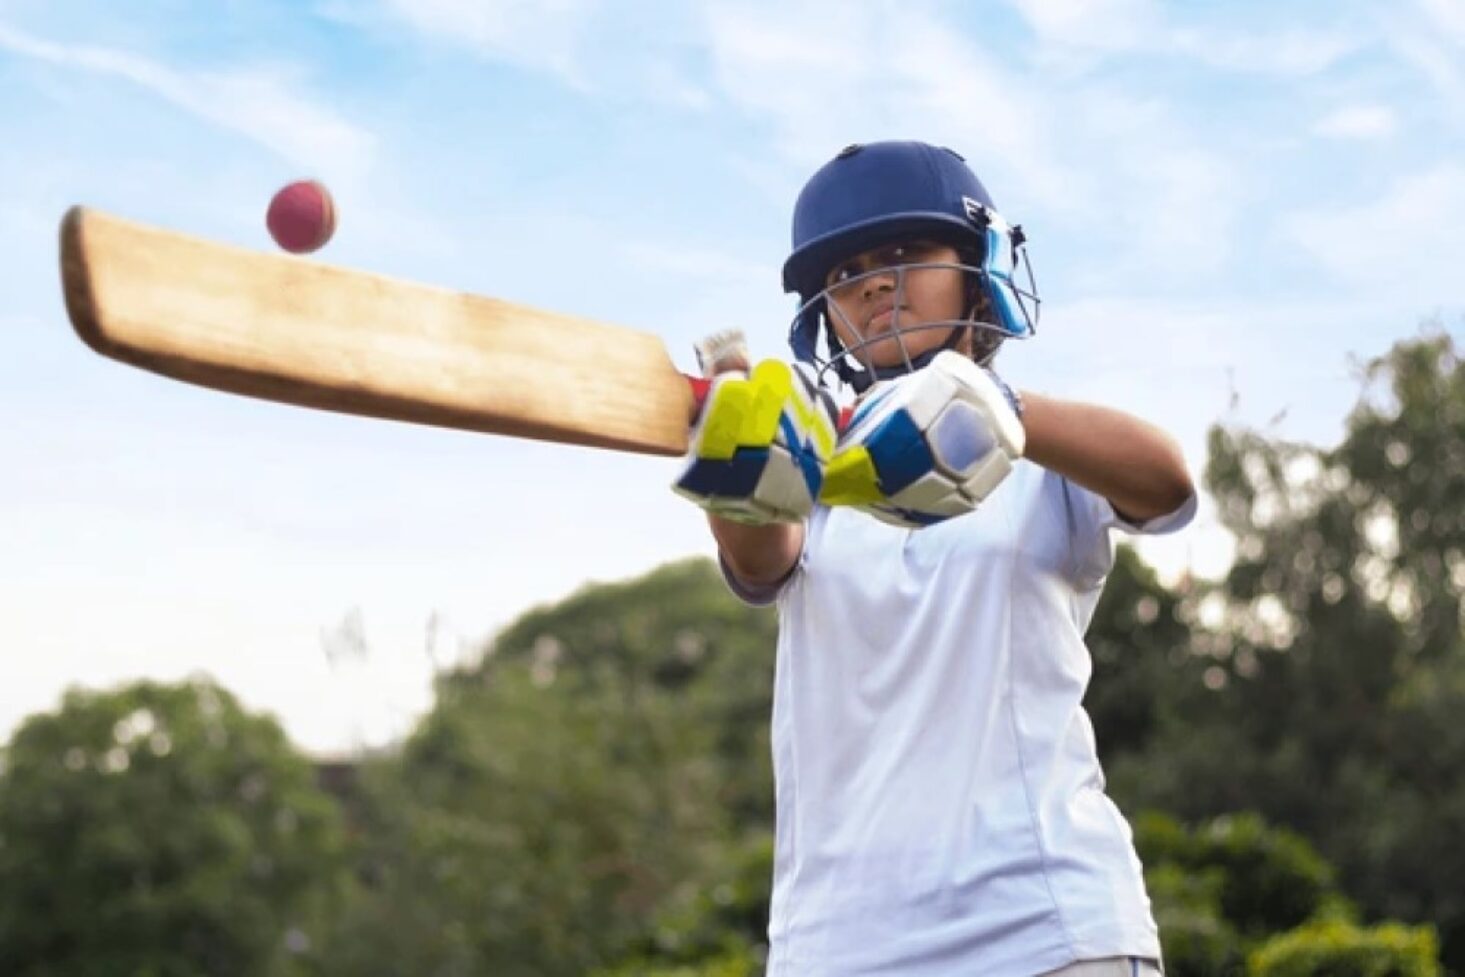 Womens Cricket and The Role of Academies and Training Programs